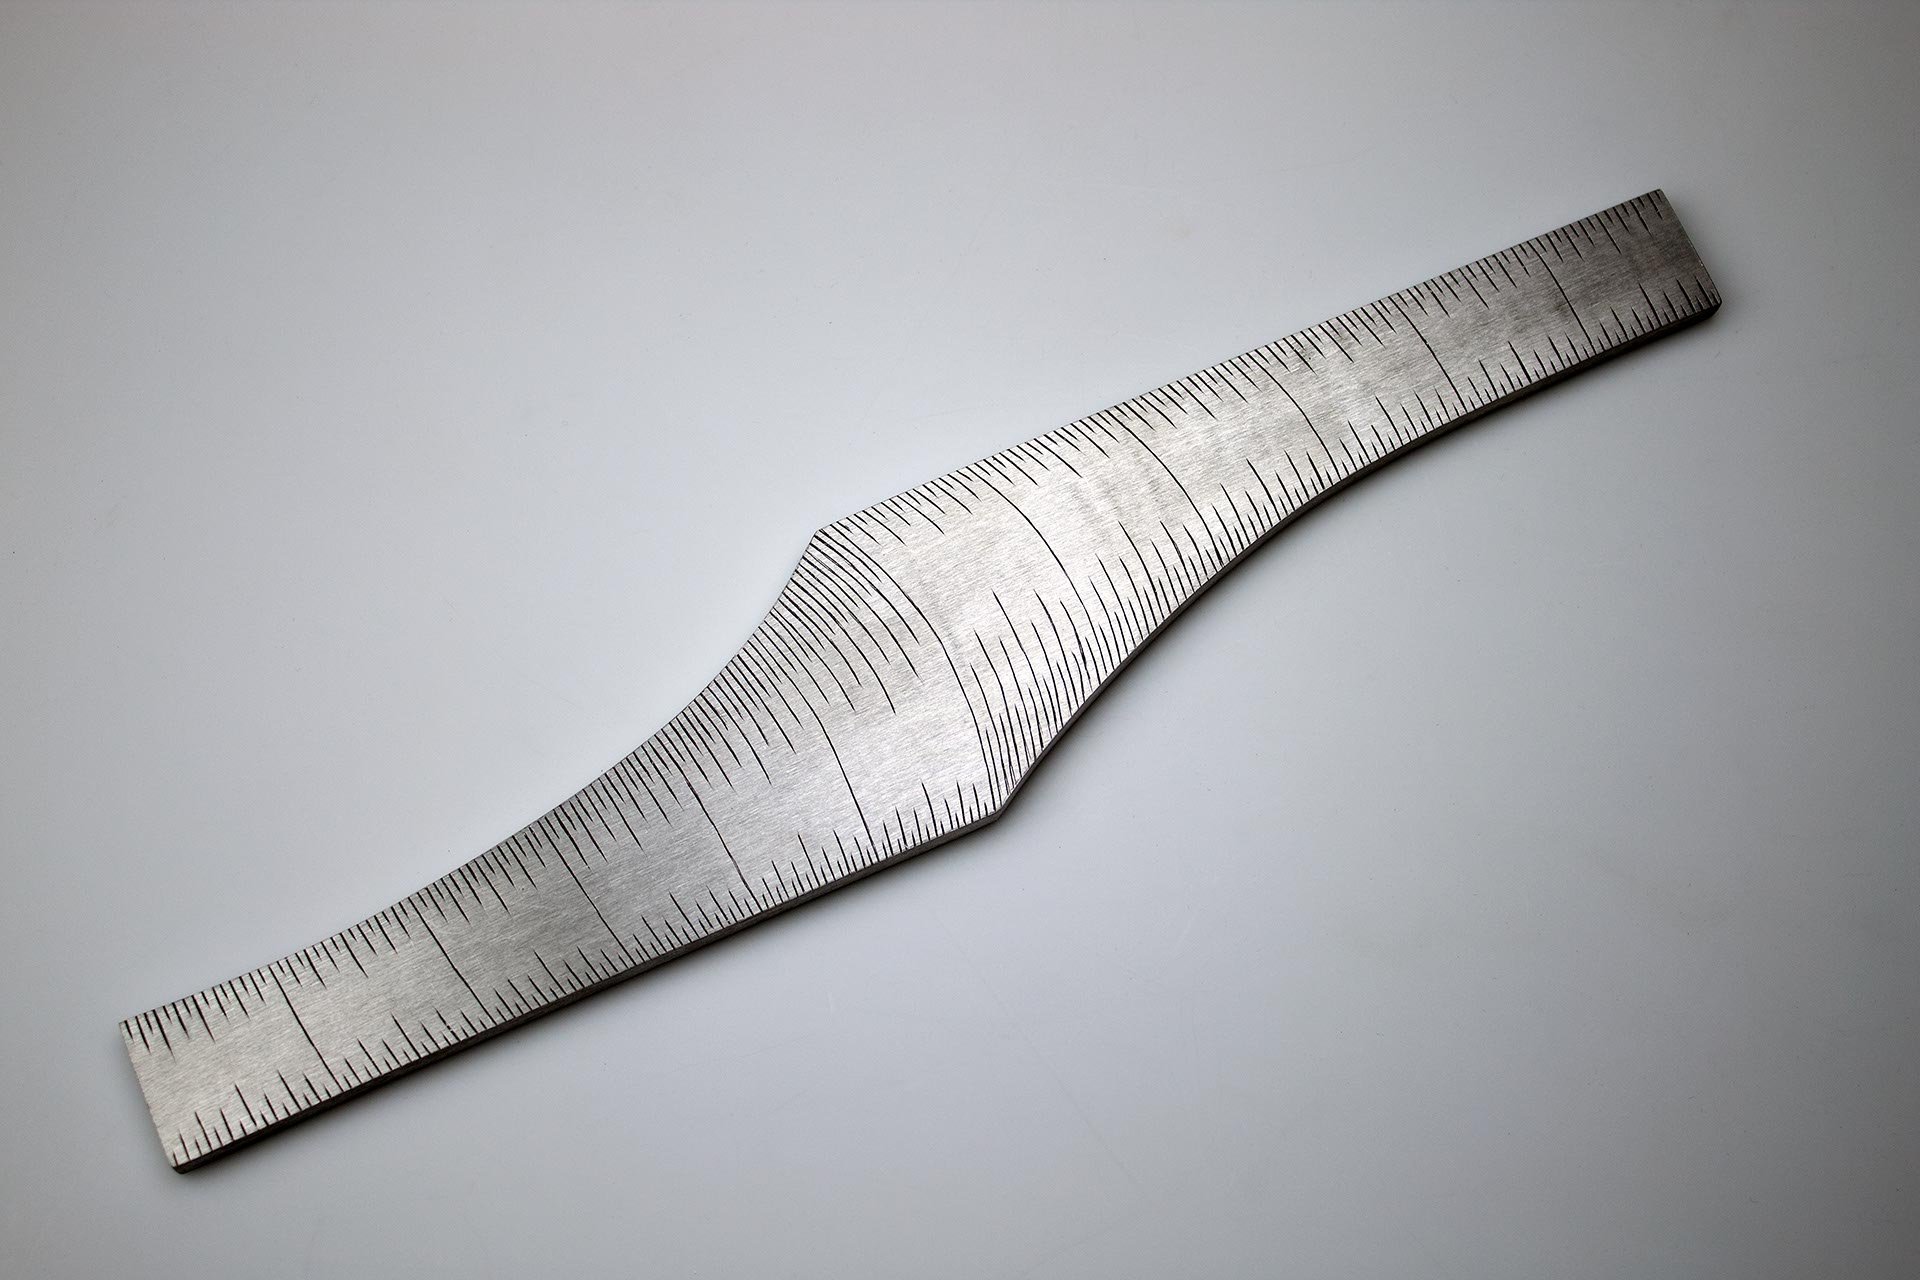 Instrument #57, hand engraved aluminum and ink, 12” x 2.375" x .25" 